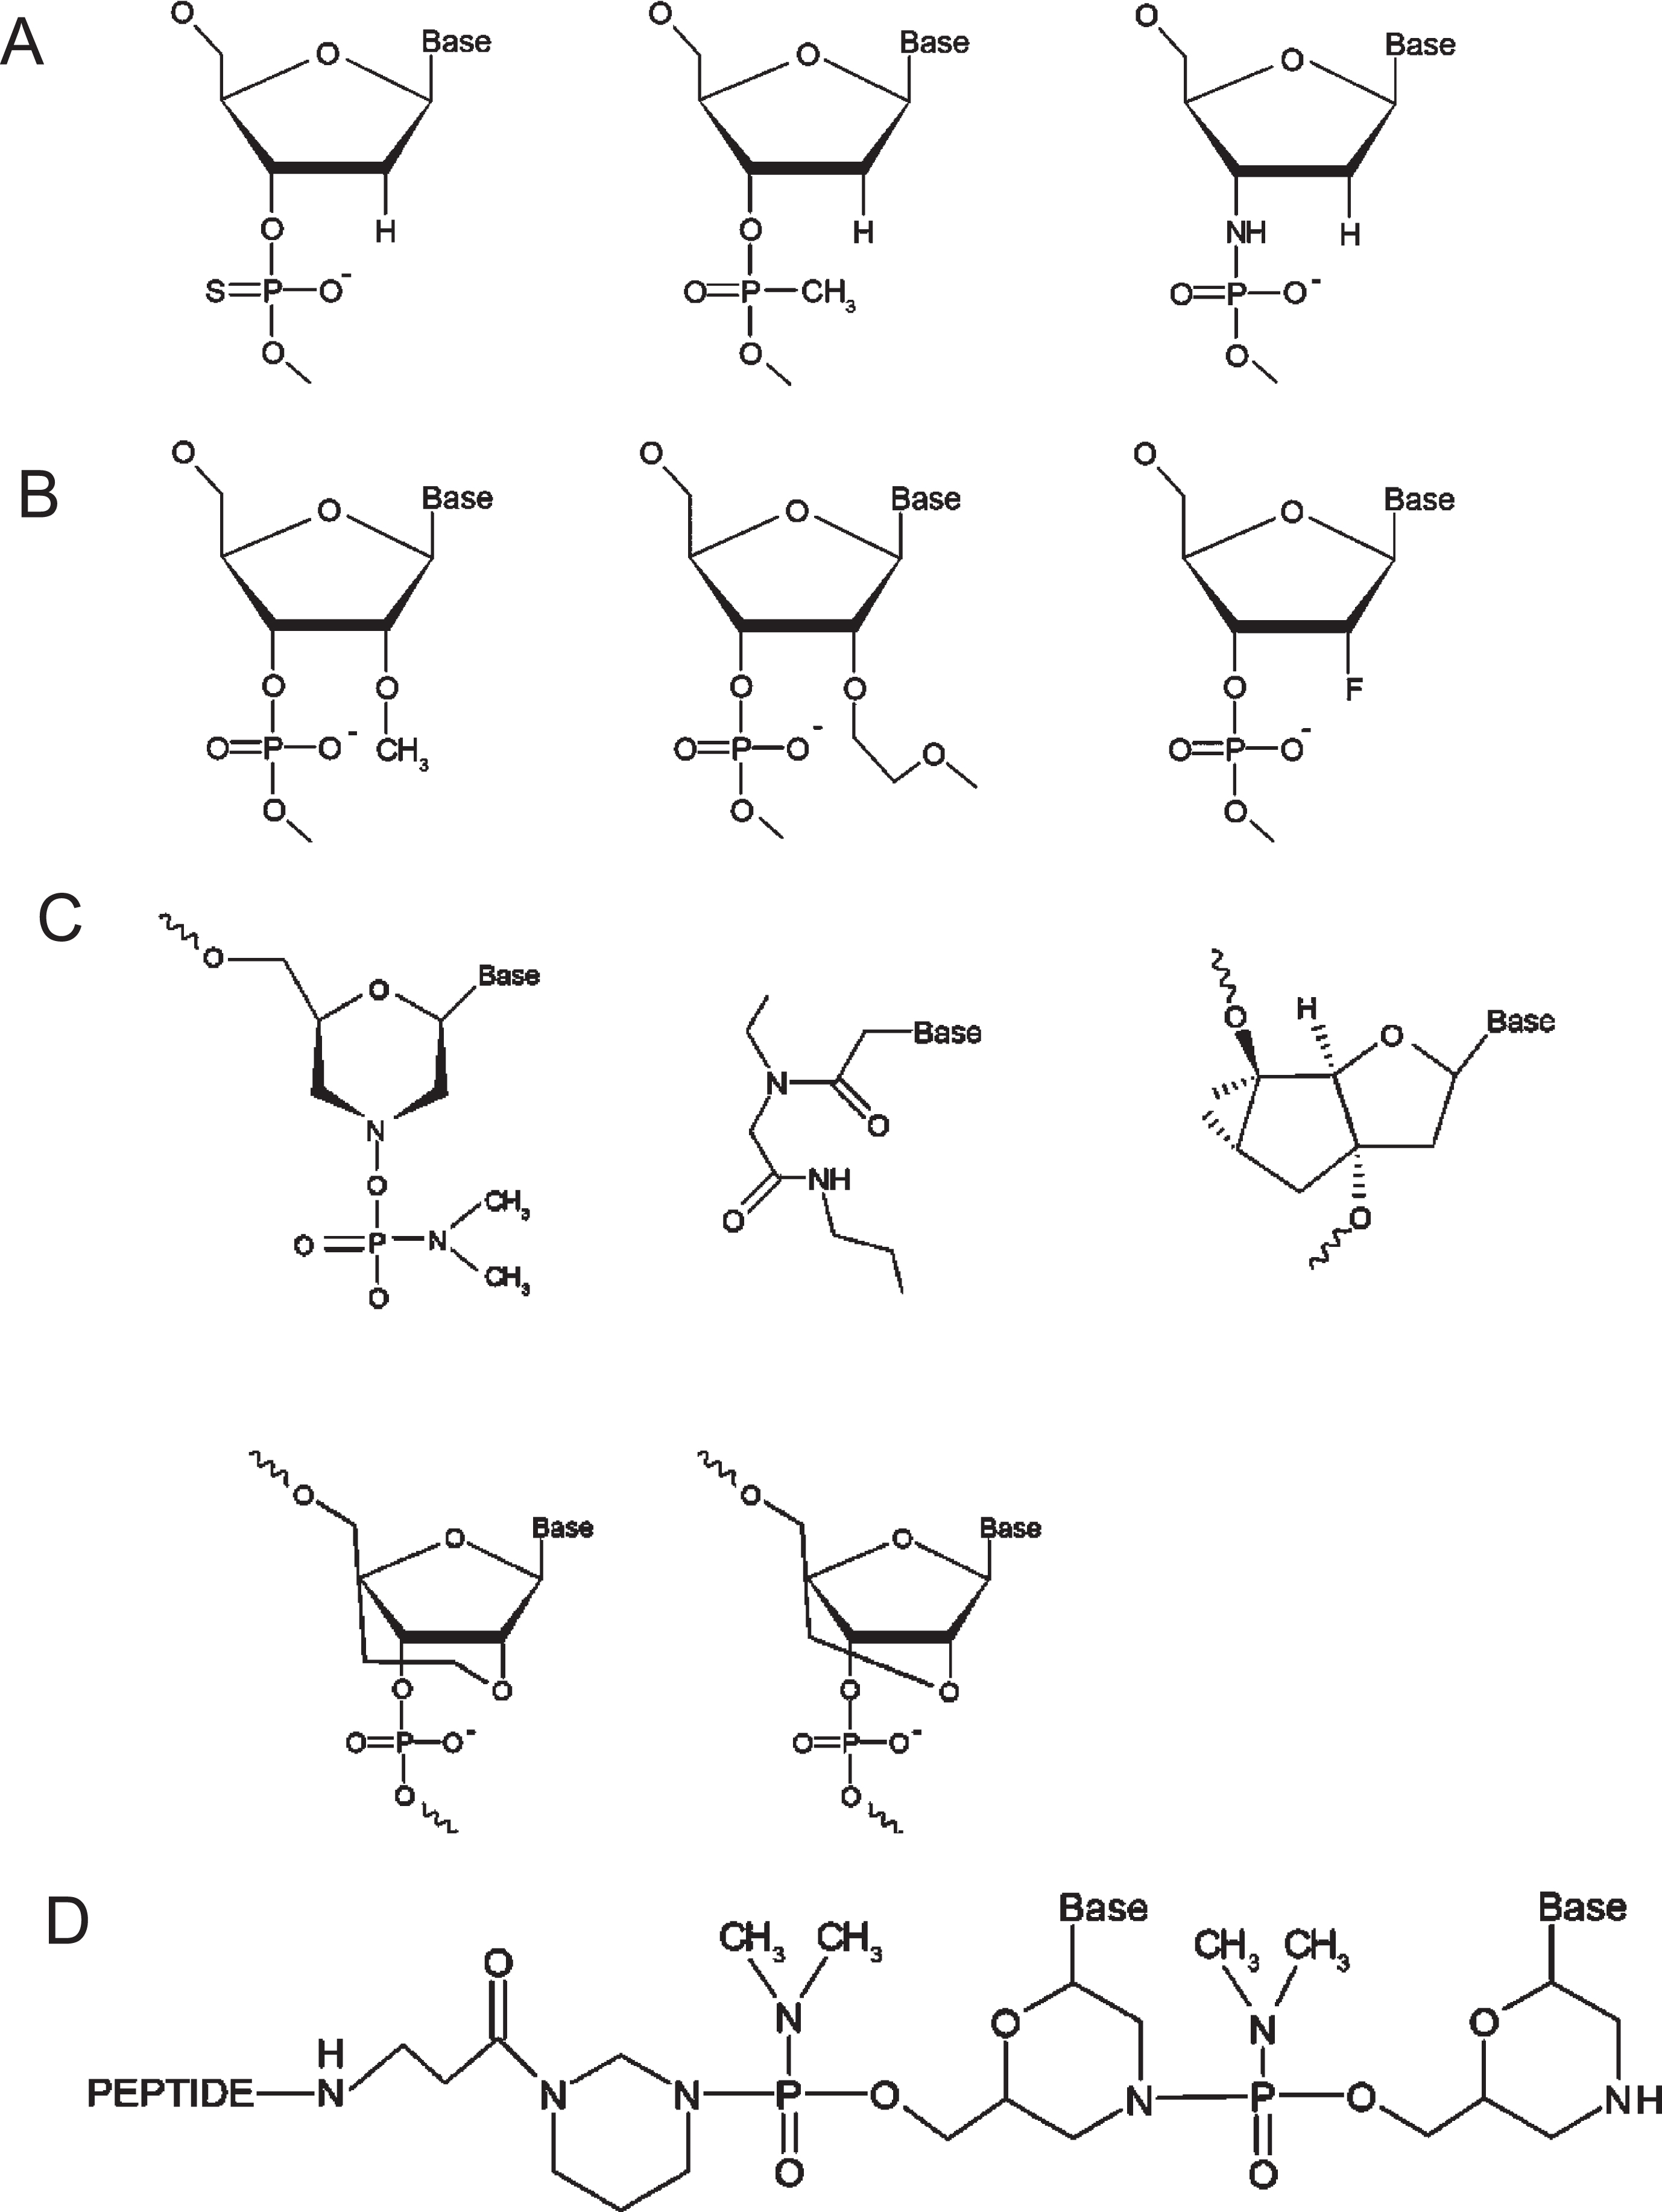 Chemical structures of therapeutic oligonucleotides. A. First generation ASOs, including phosphothioate, methylphosphonate, and phosphoramidate (from left to right). B. Second generation ASOs, including 2′-O-methyl (2′-OMe), 2′-O-methoxyethyl (2′-MOE) and 2′-fluoro (from left to right). C. Third generation ASOs, including phosphorodiamidate morpholinos (PMO), peptide nucleic acids (PNA), and tricyclo-DNAs (upper, from left to right), as well as ethylene-bridged nucleic acids (ENA) and locked nucleic acids (LNA)(lower, from left to right). D. The new generation of peptide-conjugated PMOs (PPMOs). Figure 2 adapted from Tsoumpra MK, et al. EBioMedicine. 2019;45:630–45.